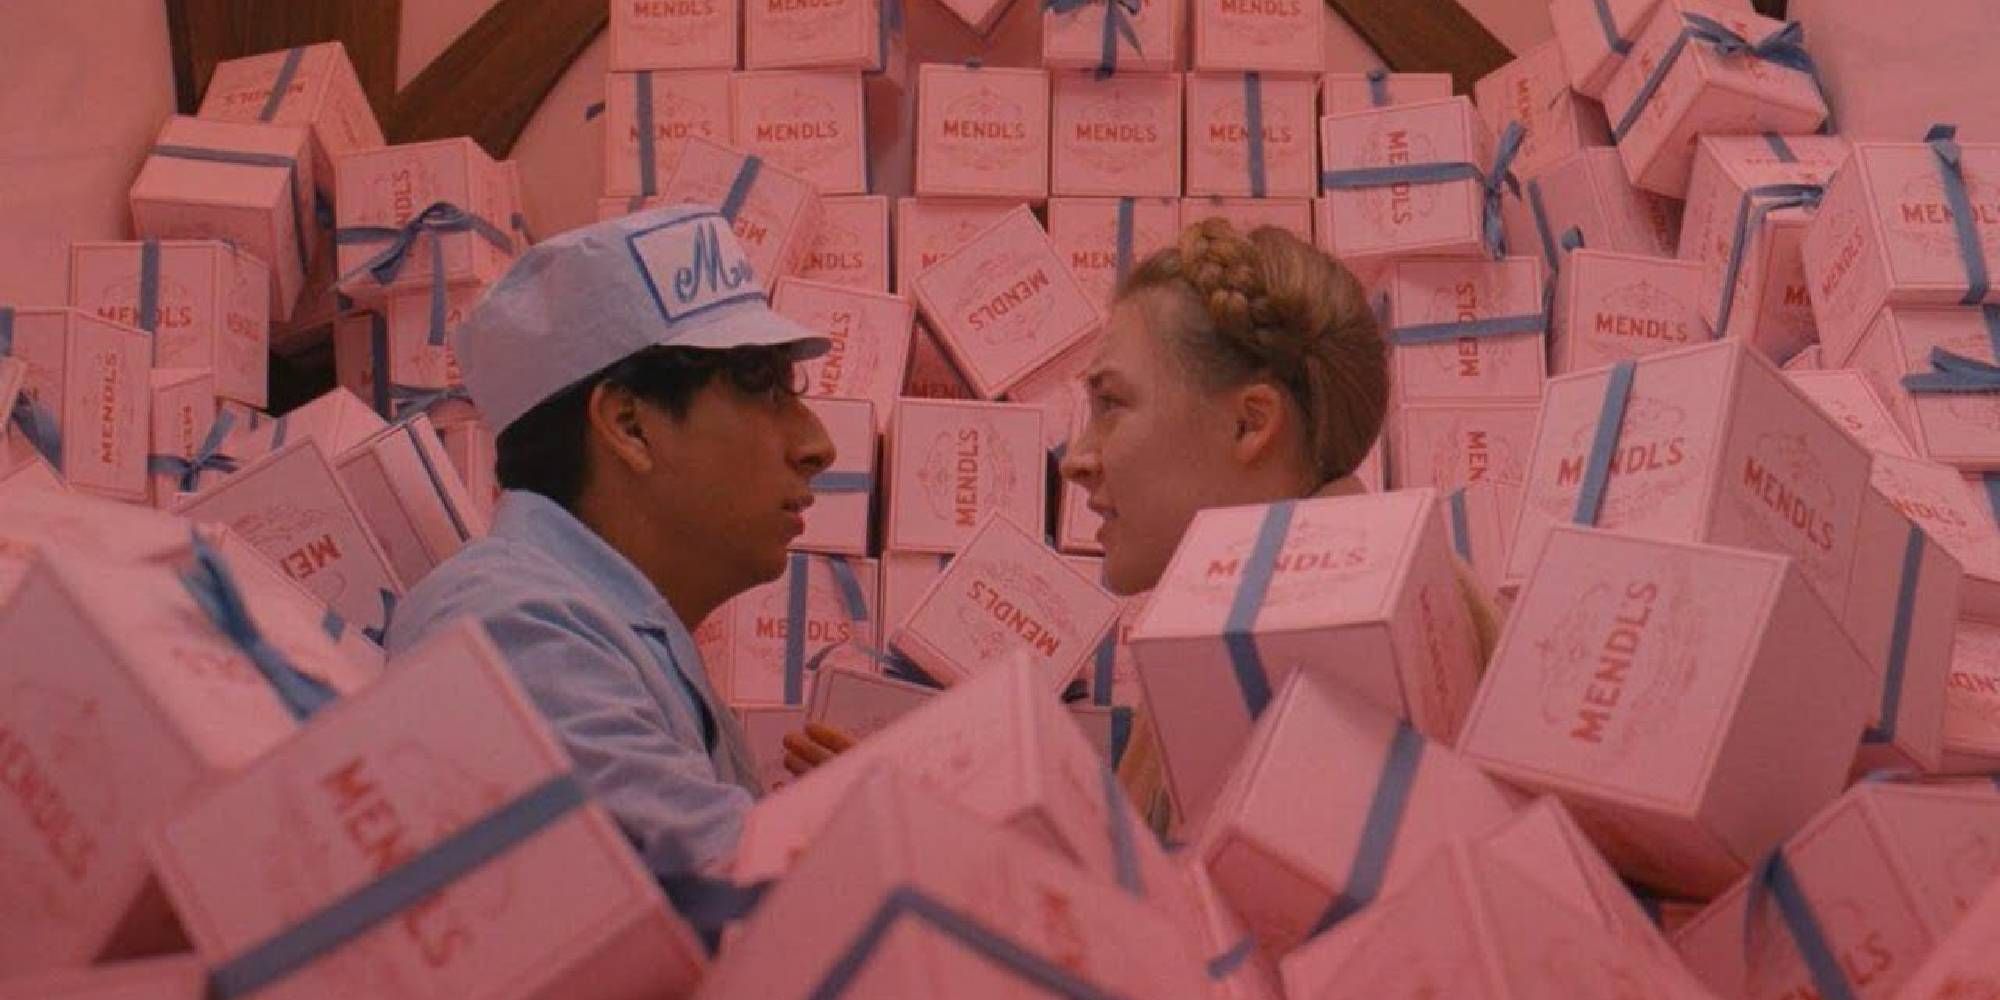 Tony Revolori and Saoirse Ronan in The Grand Budapest Hotel surrounded by pink boxes.